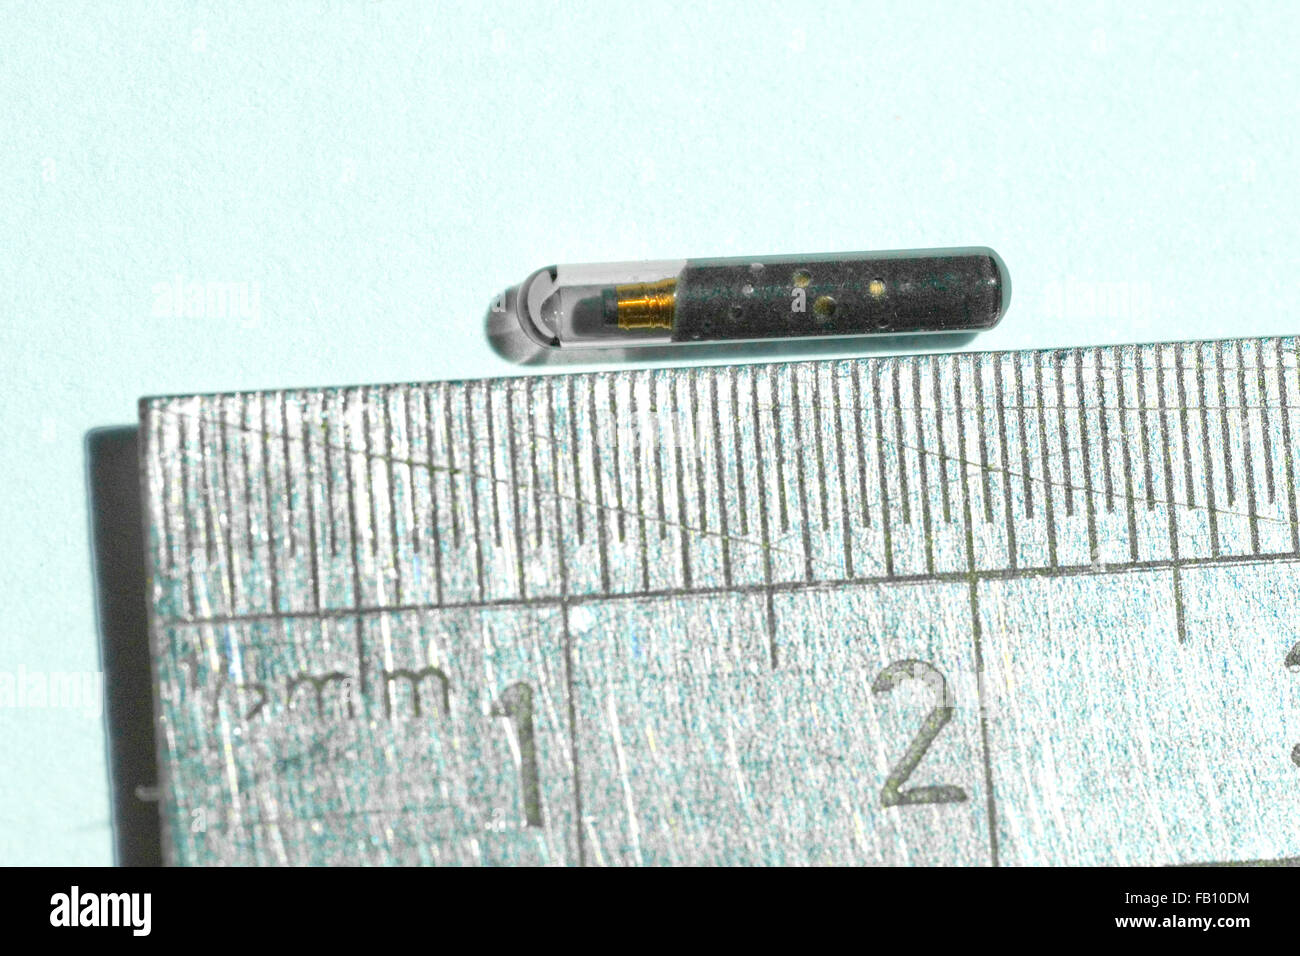 microchip against a ruler to show its size Stock Photo